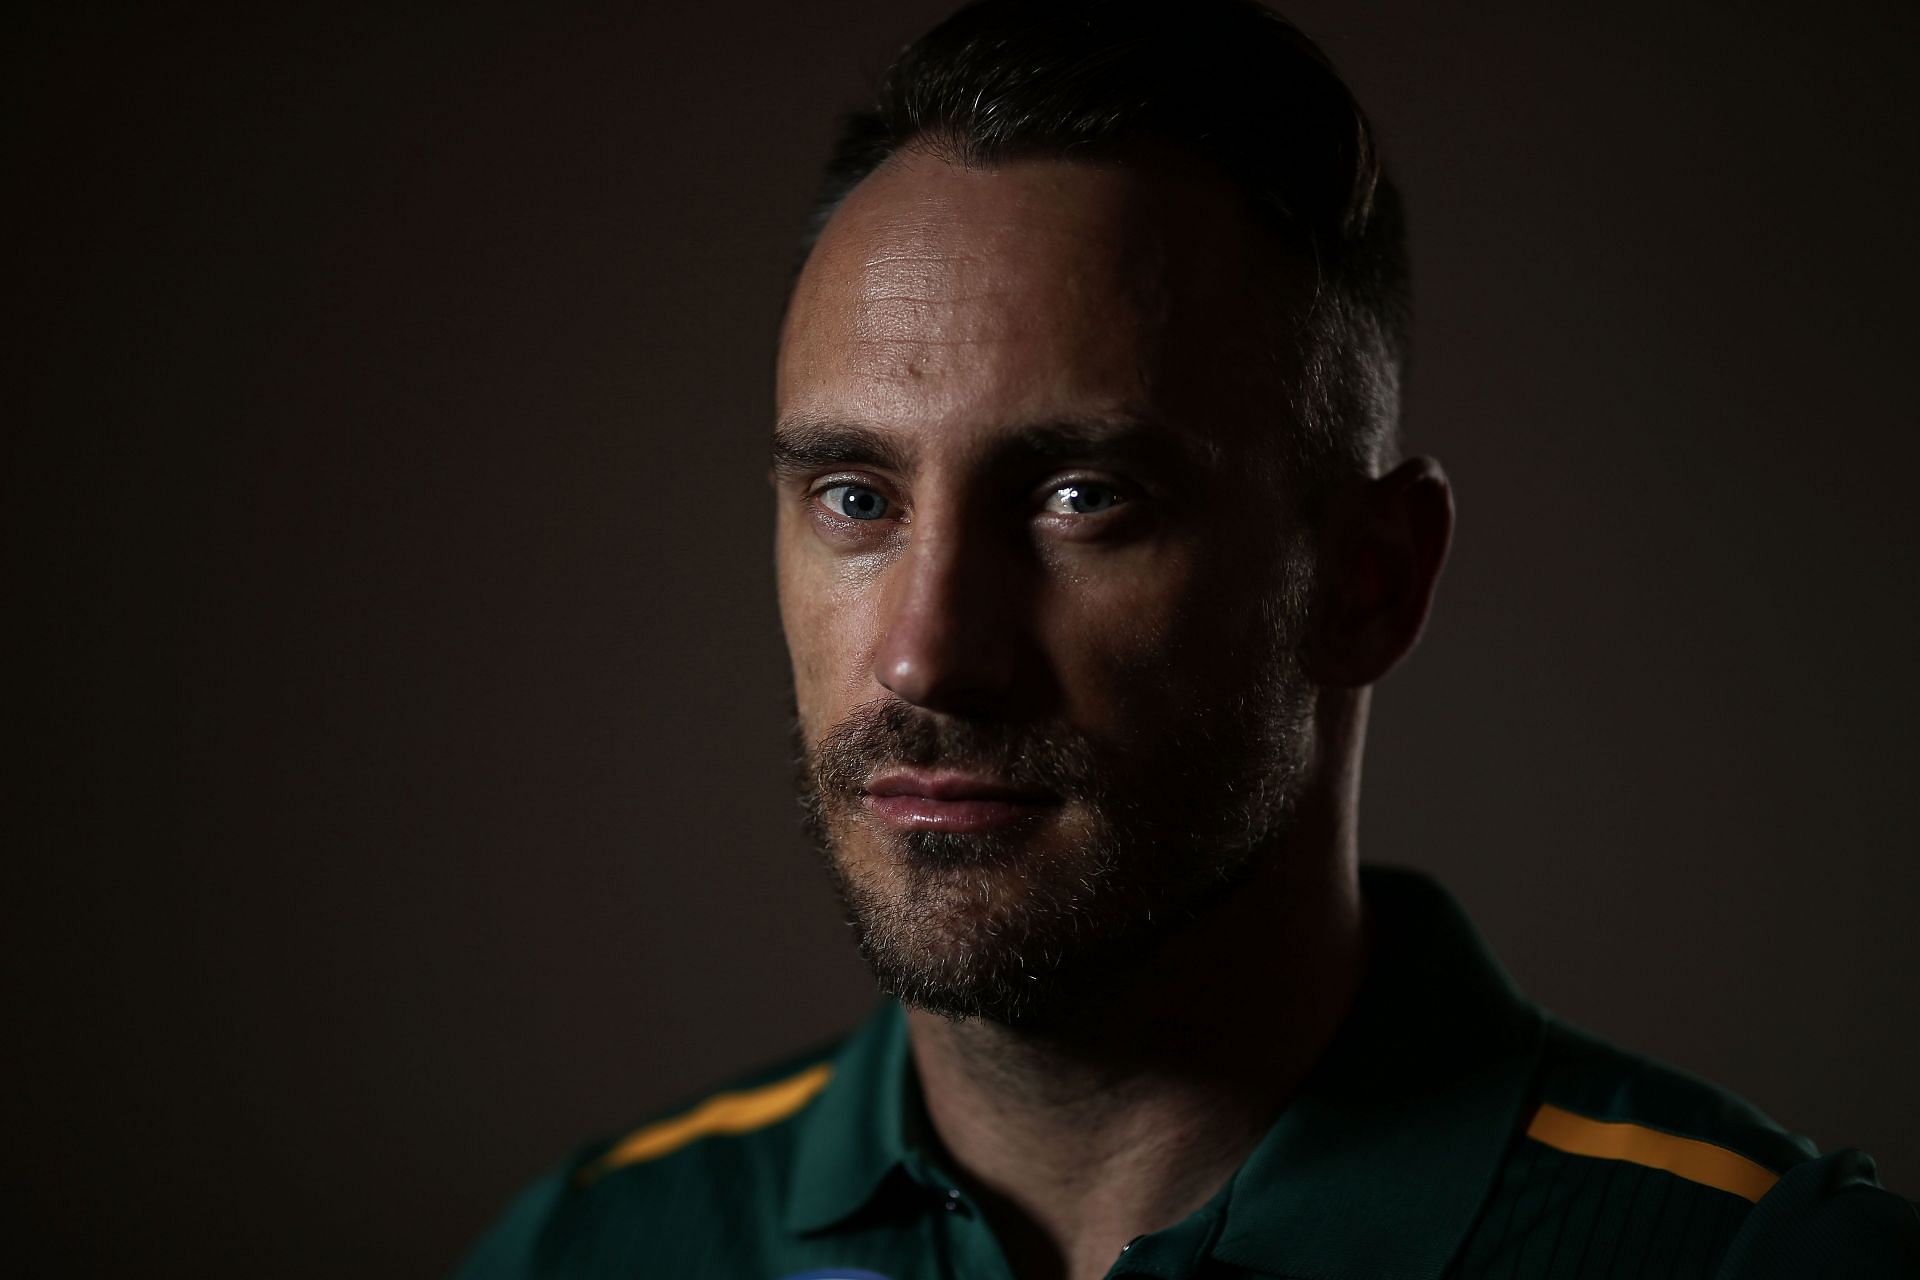 Faf du Plessis is the new captain of RCB